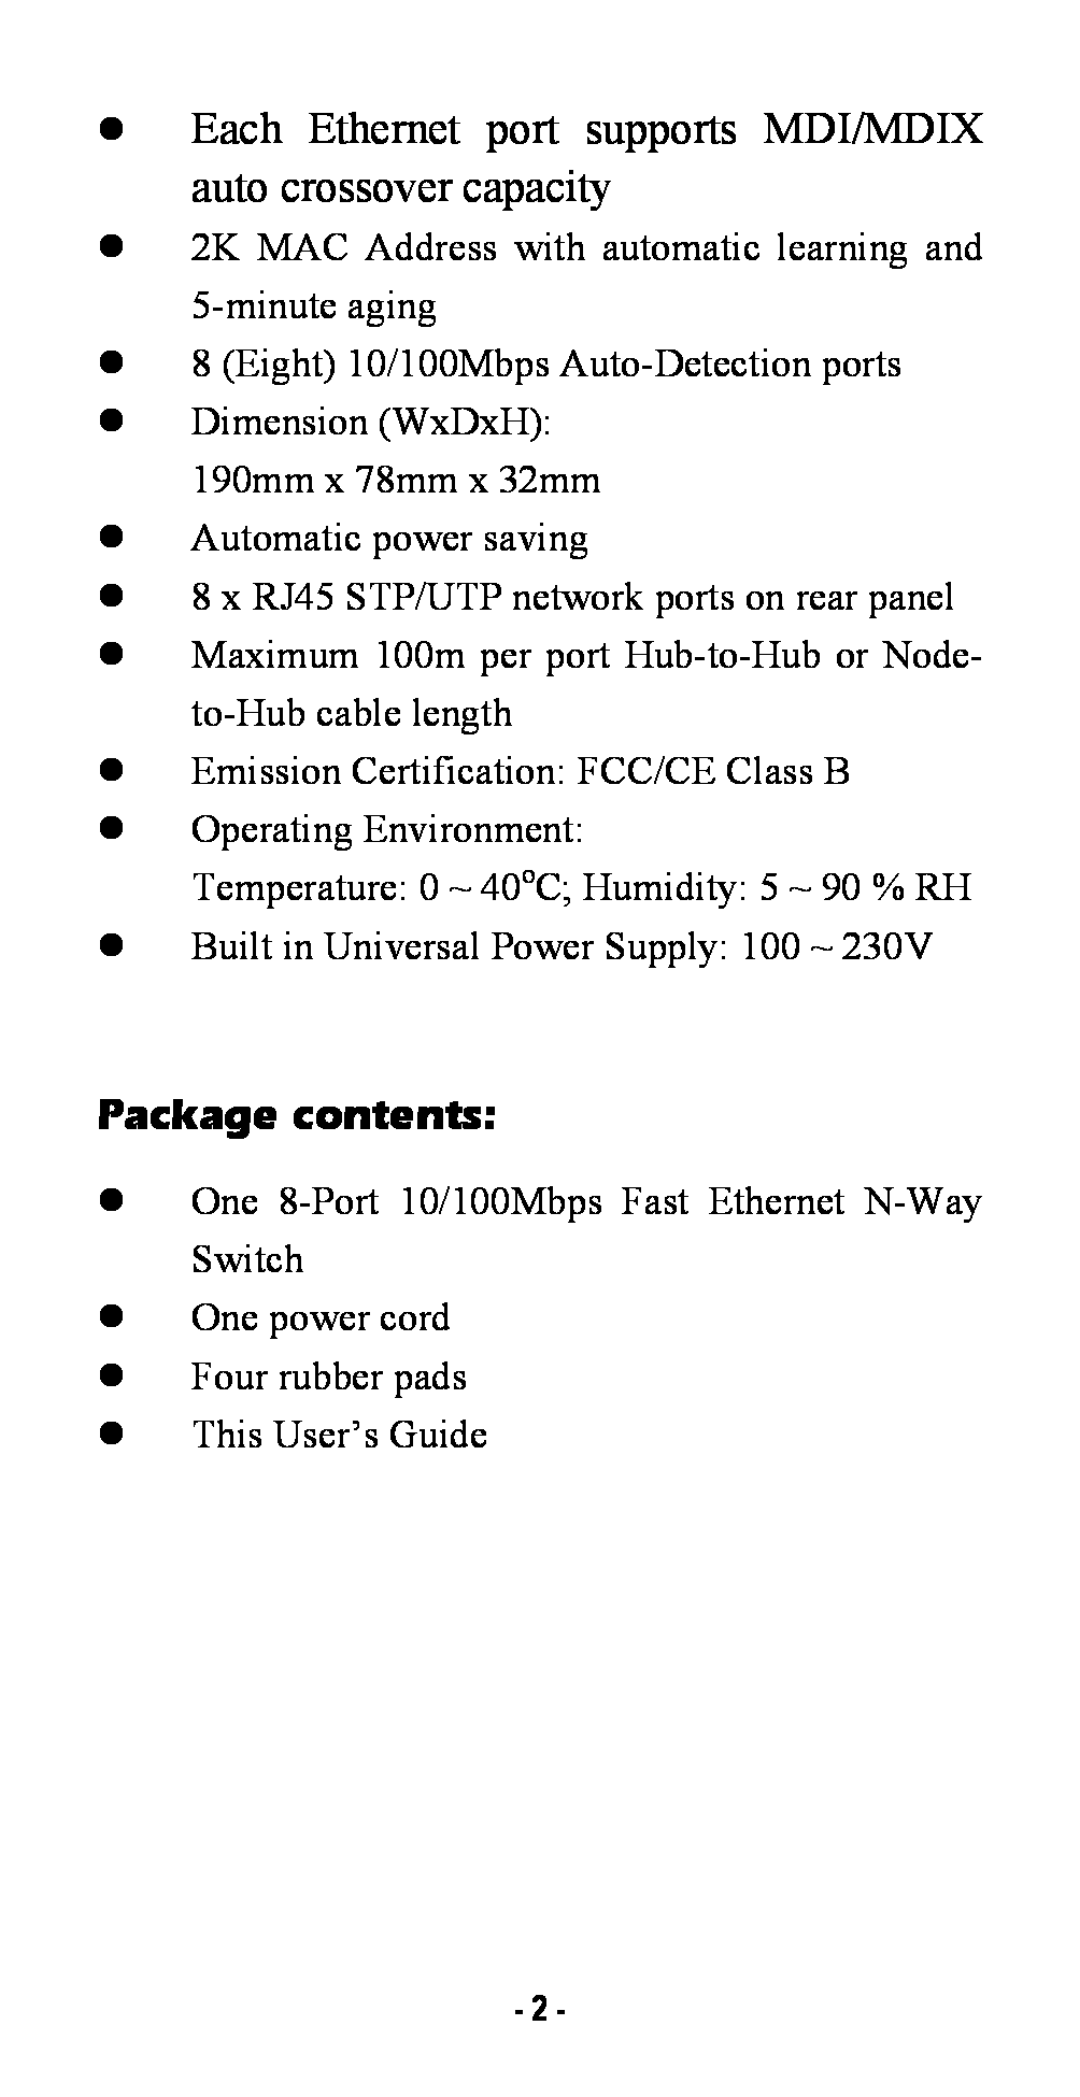 Abocom SW800AI manual Package contents, Each Ethernet port supports MDI/MDIX auto crossover capacity 